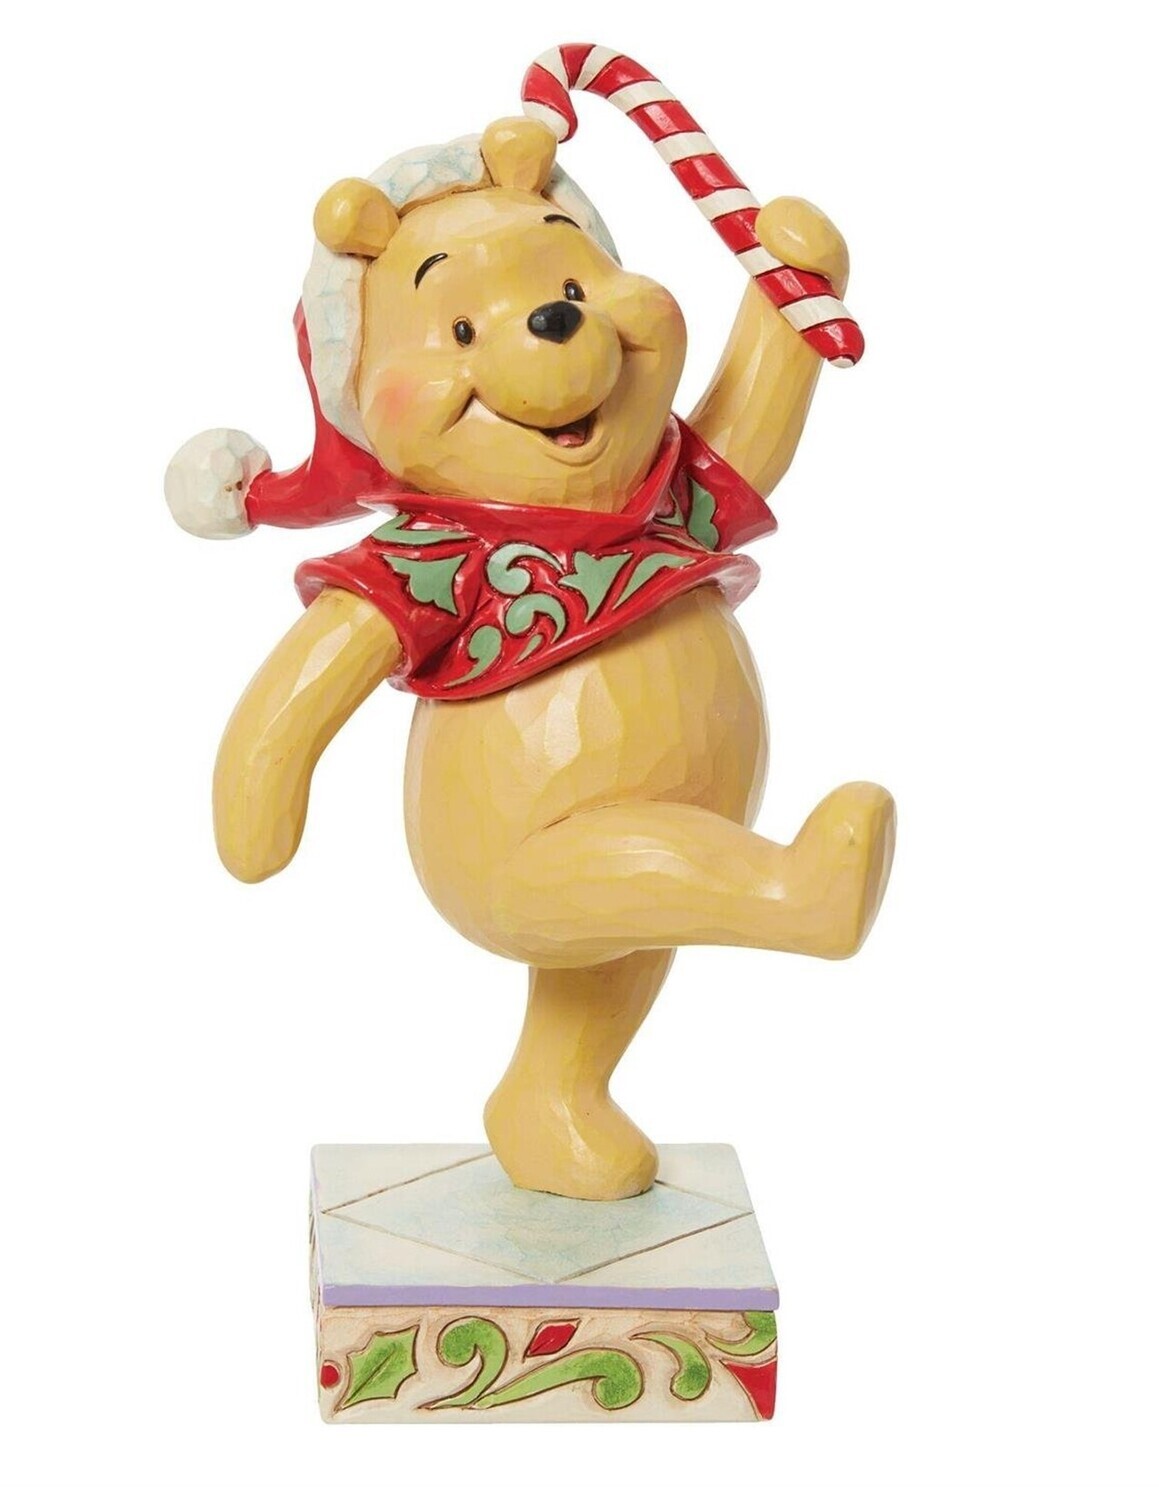 Jim Shore Disney Traditions "Christmas Sweetie" Pooh with Candy Cane Enesco # 6013062